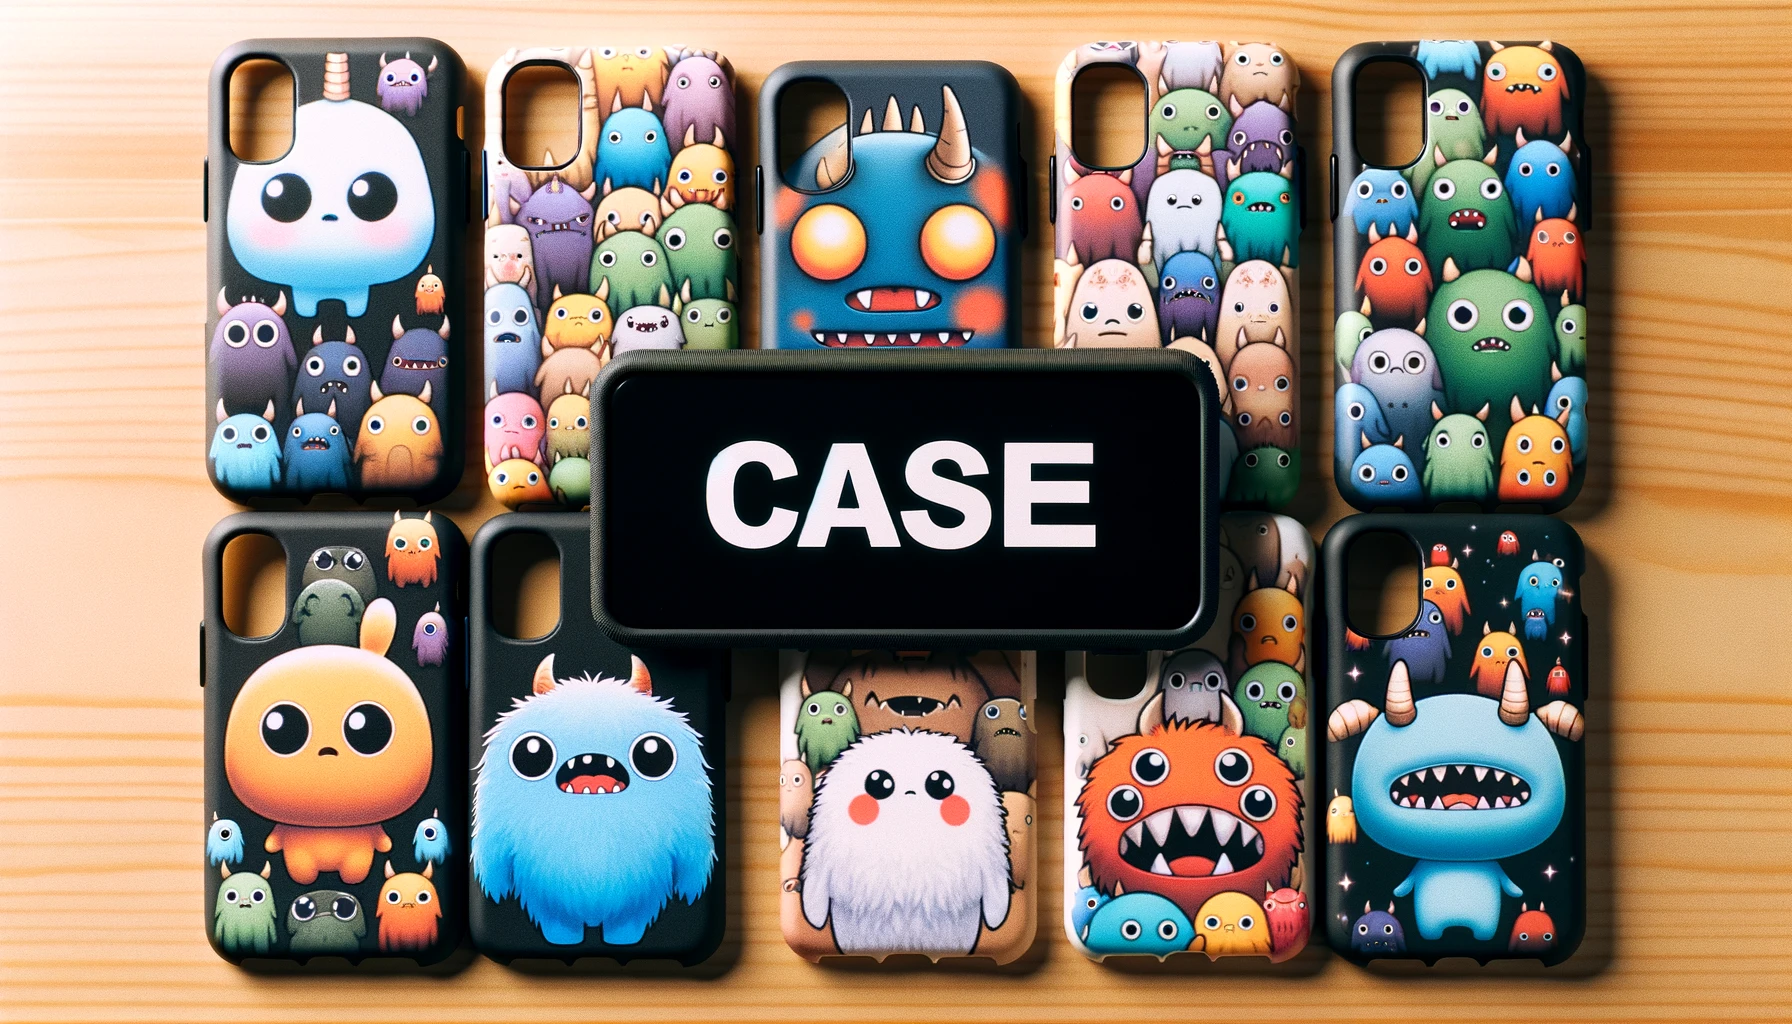 An image displaying the popularity of CASETiFY smartphone cases featuring small monster anime characters. The design should show a variety of cases, emphasizing their widespread appeal and trendiness among different age groups. The word 'CASE' should be prominently displayed on the image.